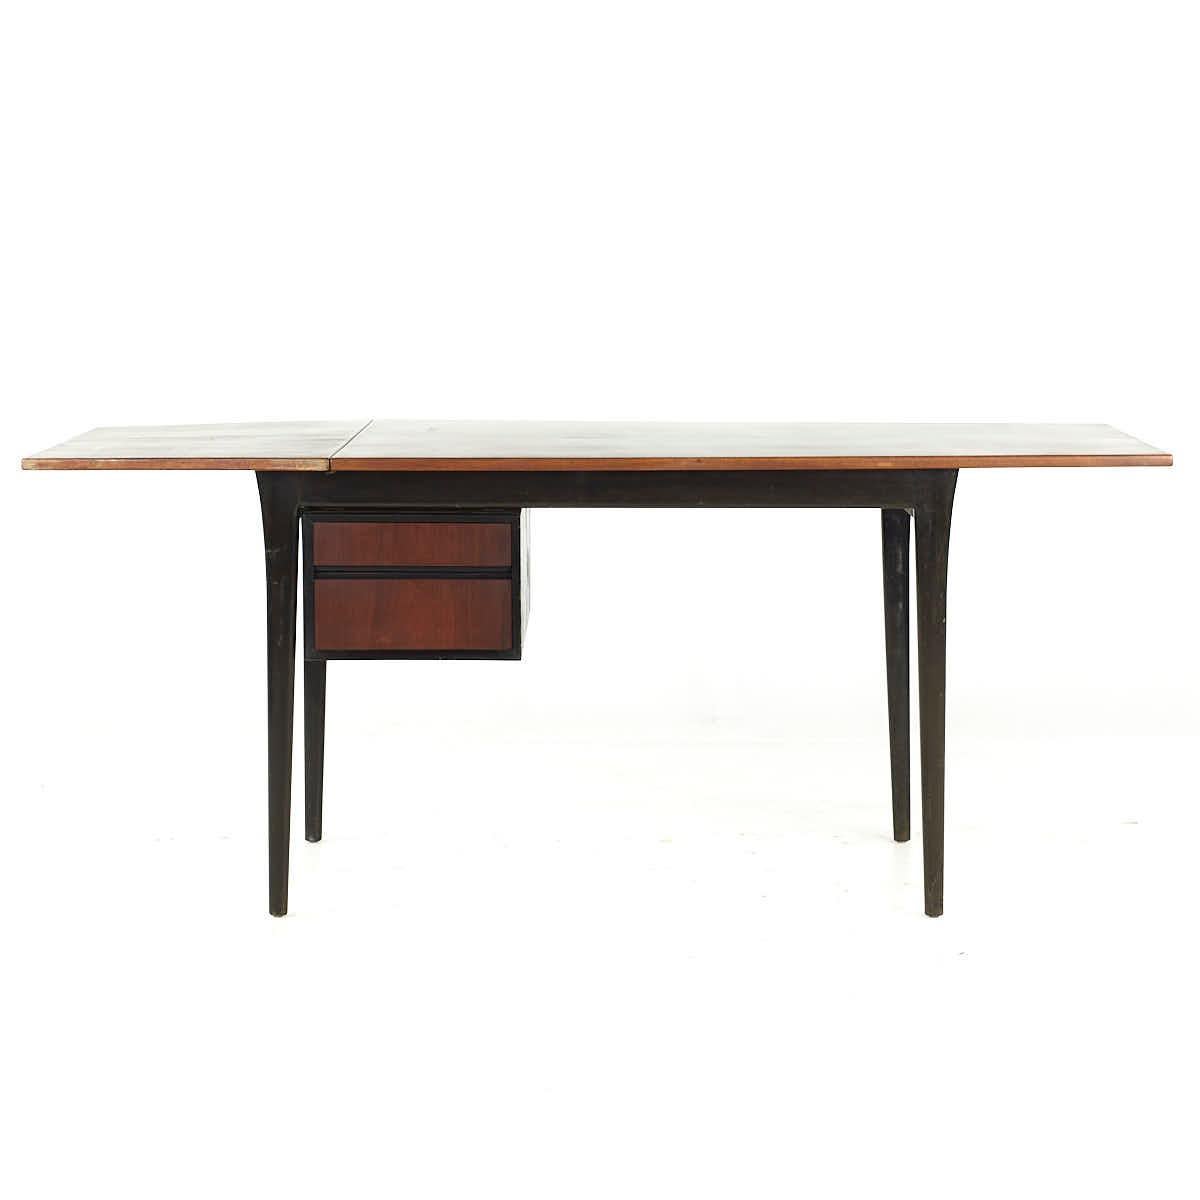 Arne Vodder for Sibast Teak Drop Leaf Desk

This drop leaf desk measures: 50 wide x 31.5 deep (tapering to 26) x 28.5 inches high, with a chair clearance of 27.75 inches; the leaf measures 18.75 inches wide, making a maximum desk width of 68.75